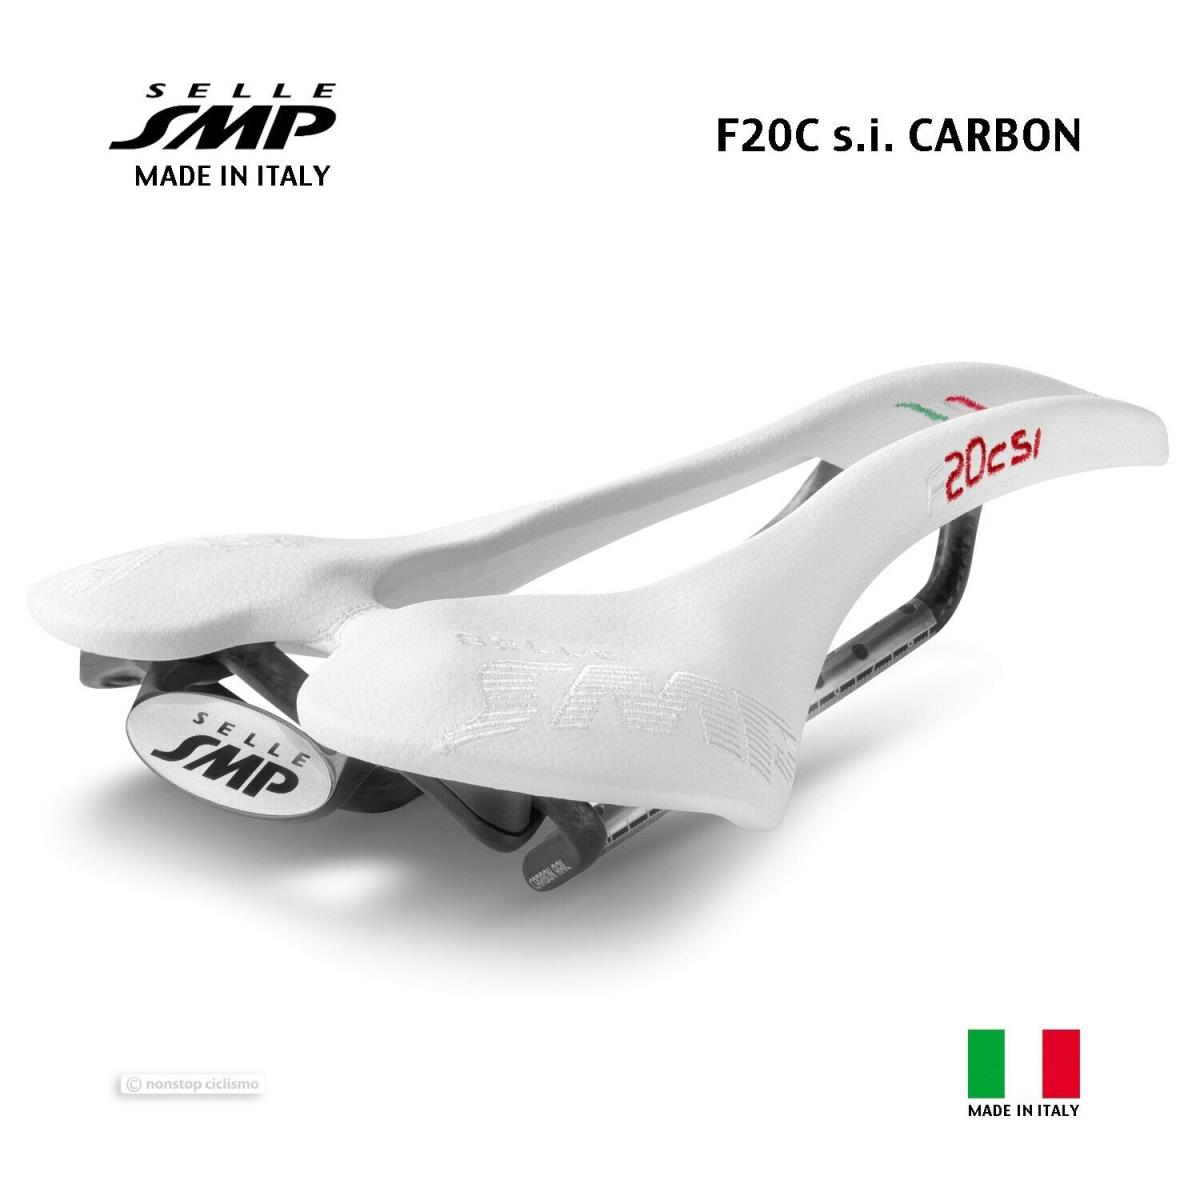 Selle Smp F20Csi Carbon Saddle : White - Made IN Italy